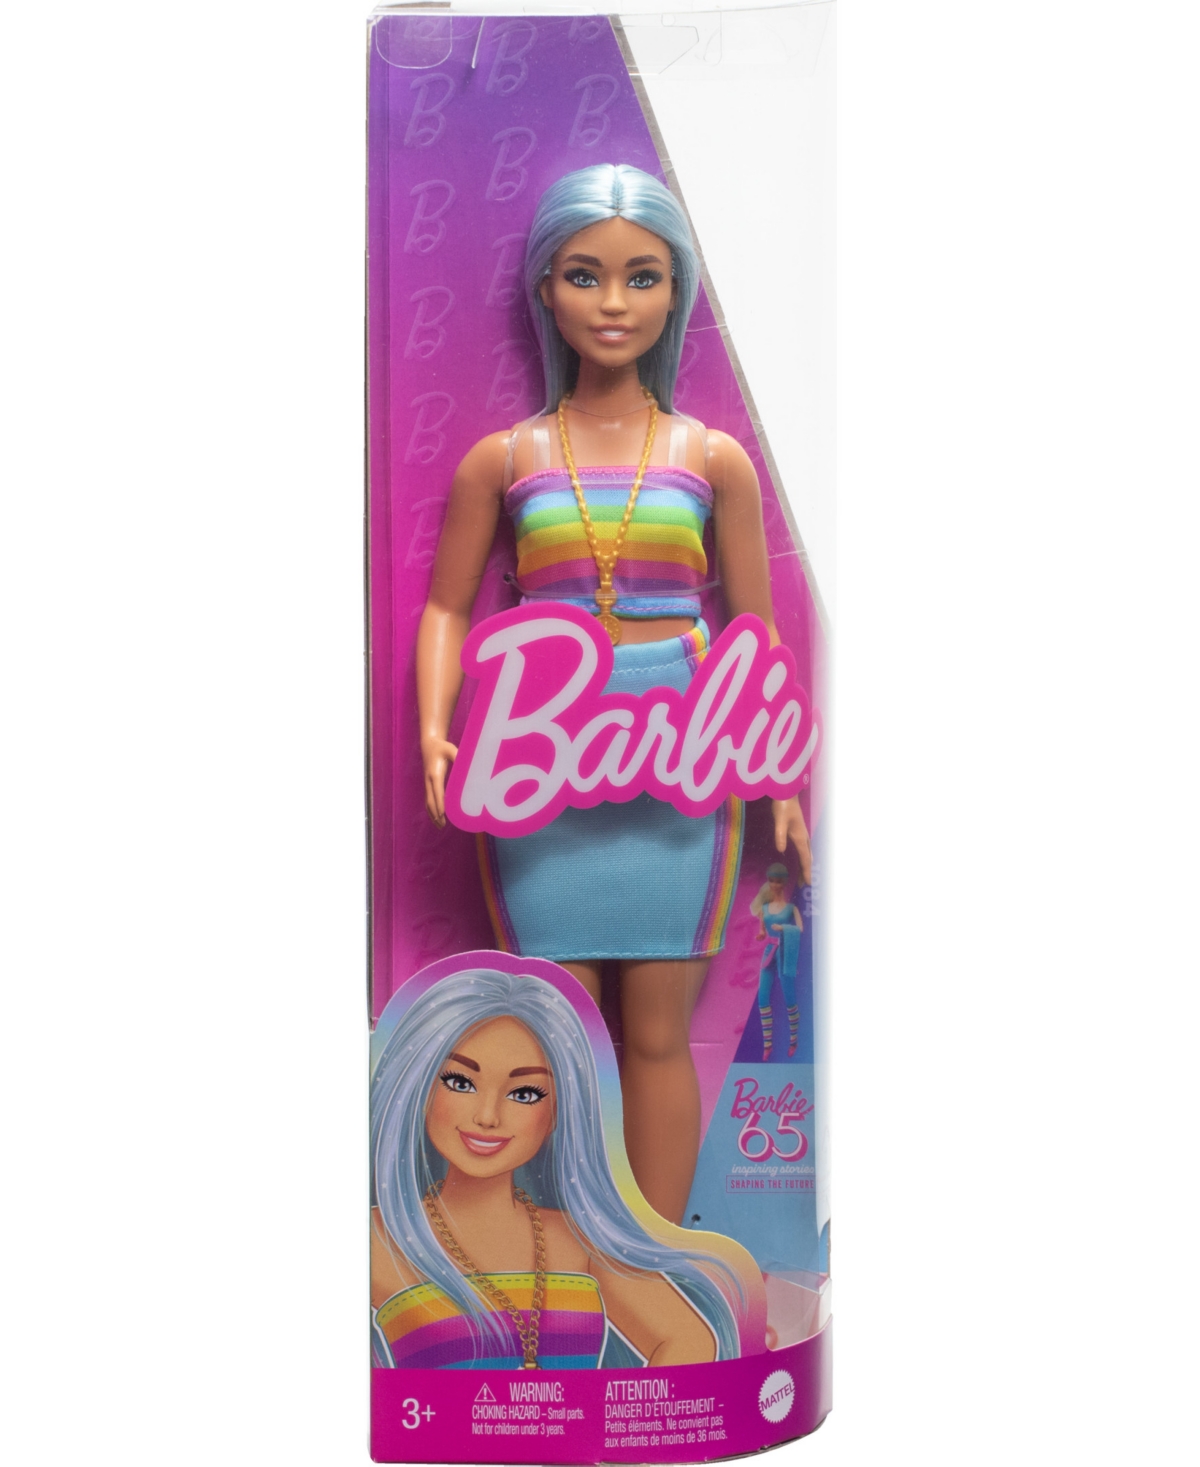 Shop Barbie Fashionistas Doll 218 With Blue Hair, Rainbow Top And Teal Skirt, 65th Anniversary In Multi